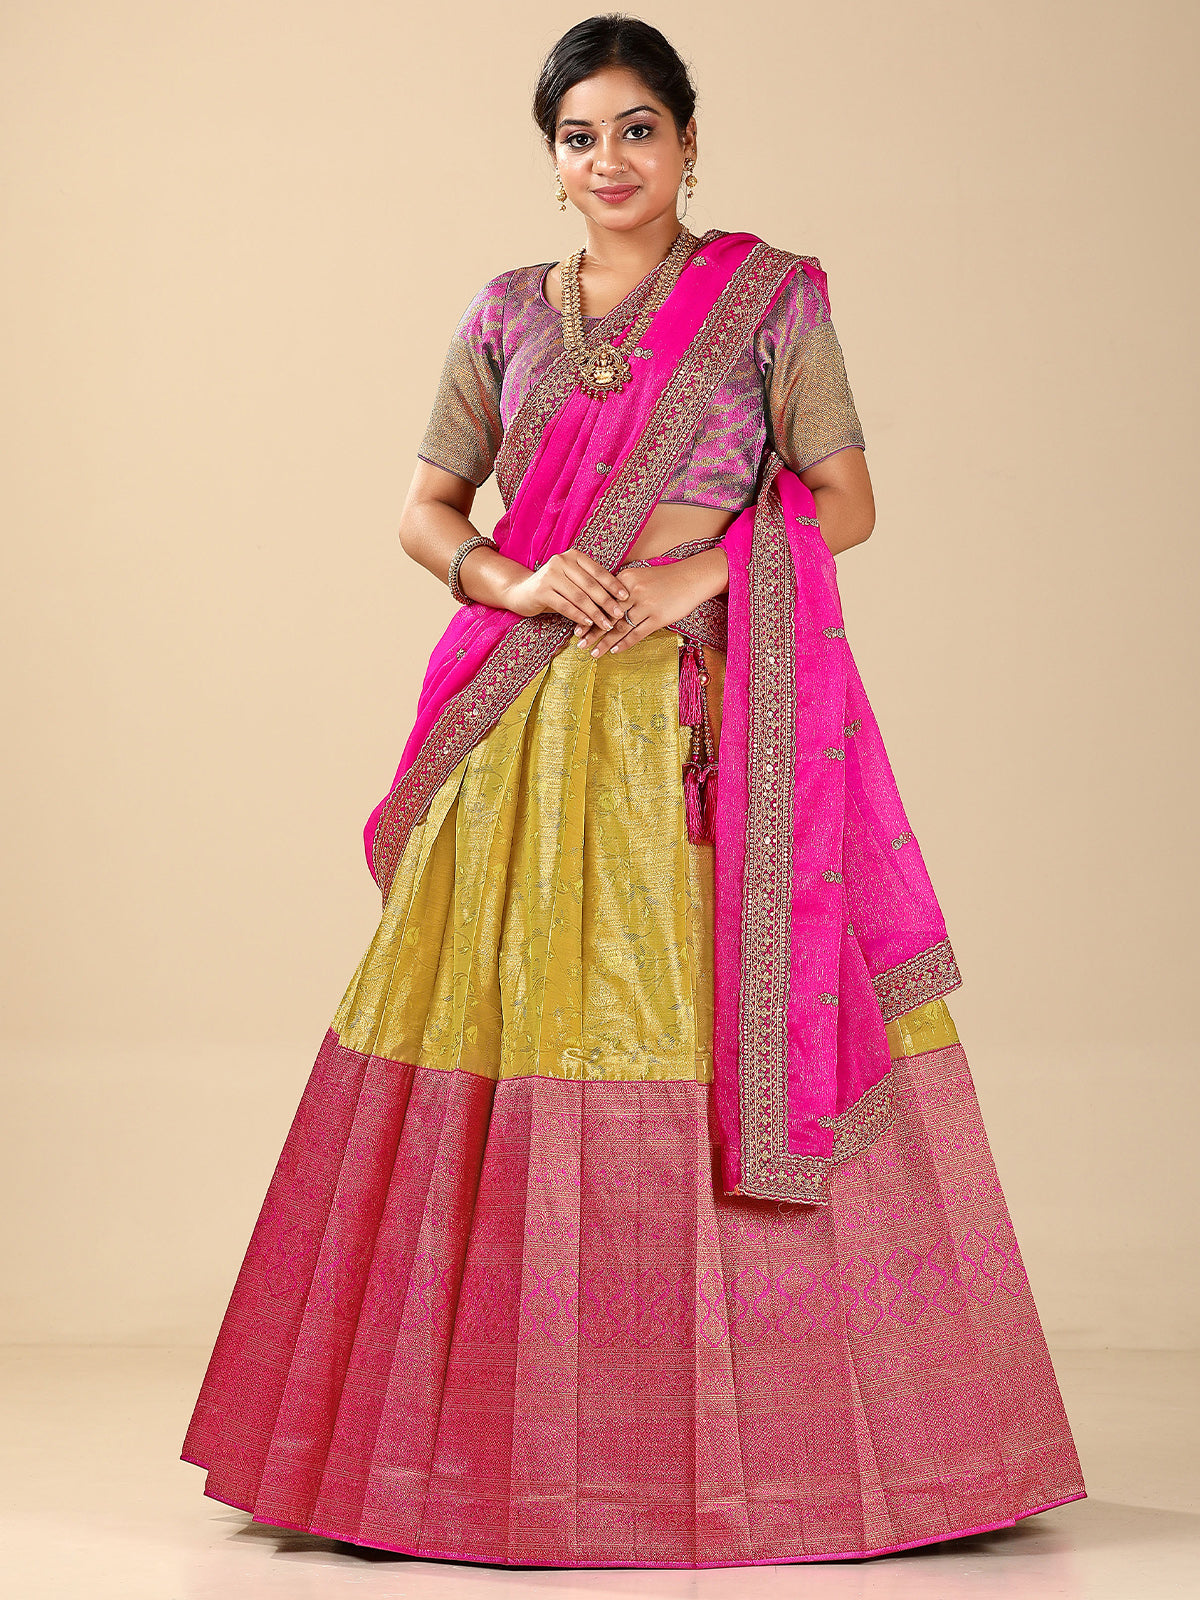 Odette Women Pink & Gold Silk Woven Semi Stitched Lehenga With Unstitched Blouse